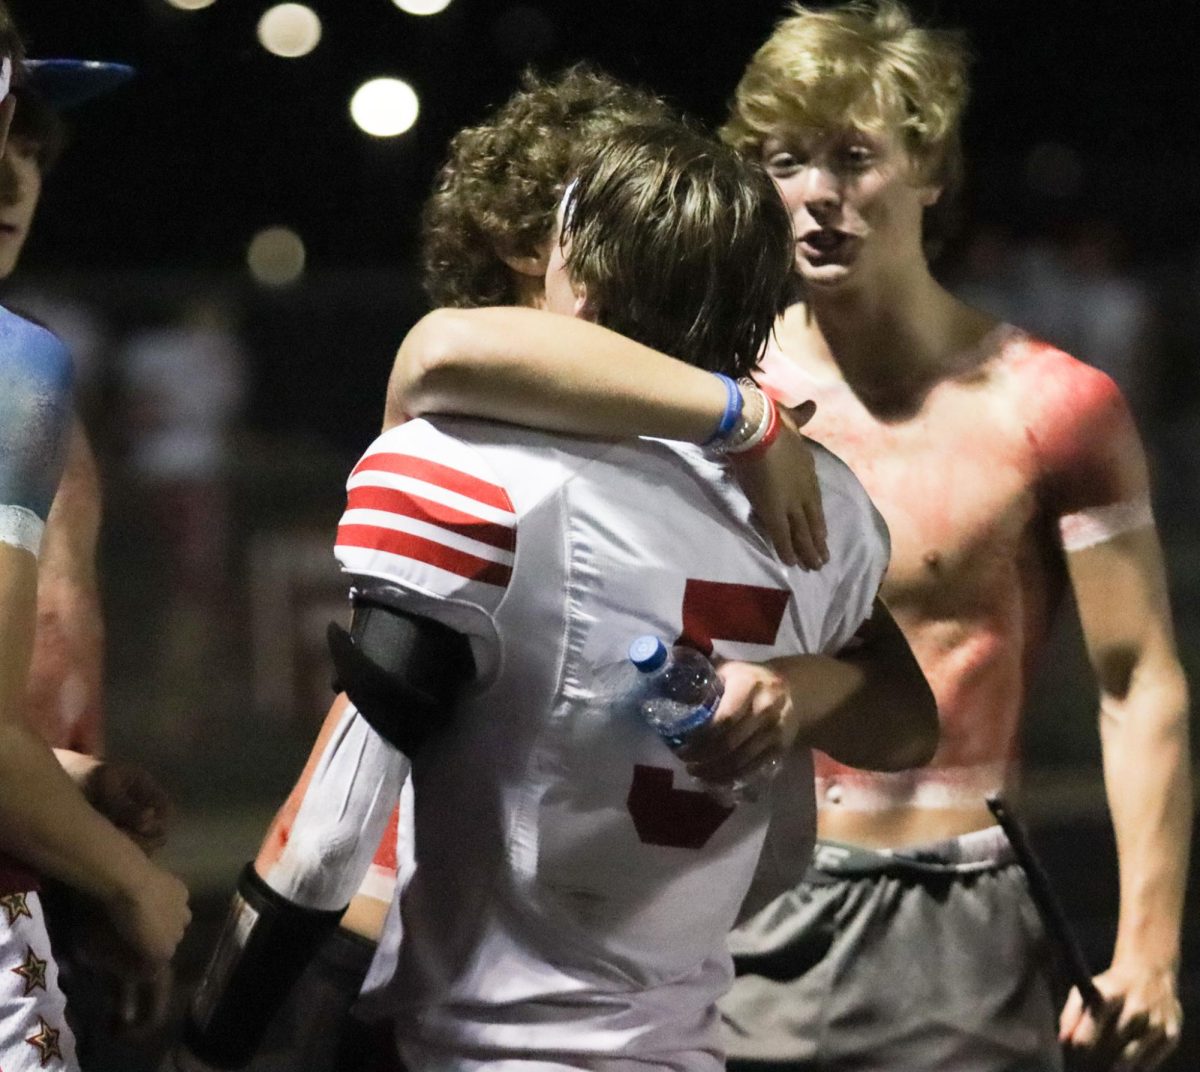 Senior Ryan Ellison gives senior Andrew Salvatore a hug after the game. The Antlers beat the Titans 26-24 on Friday, September 1st.